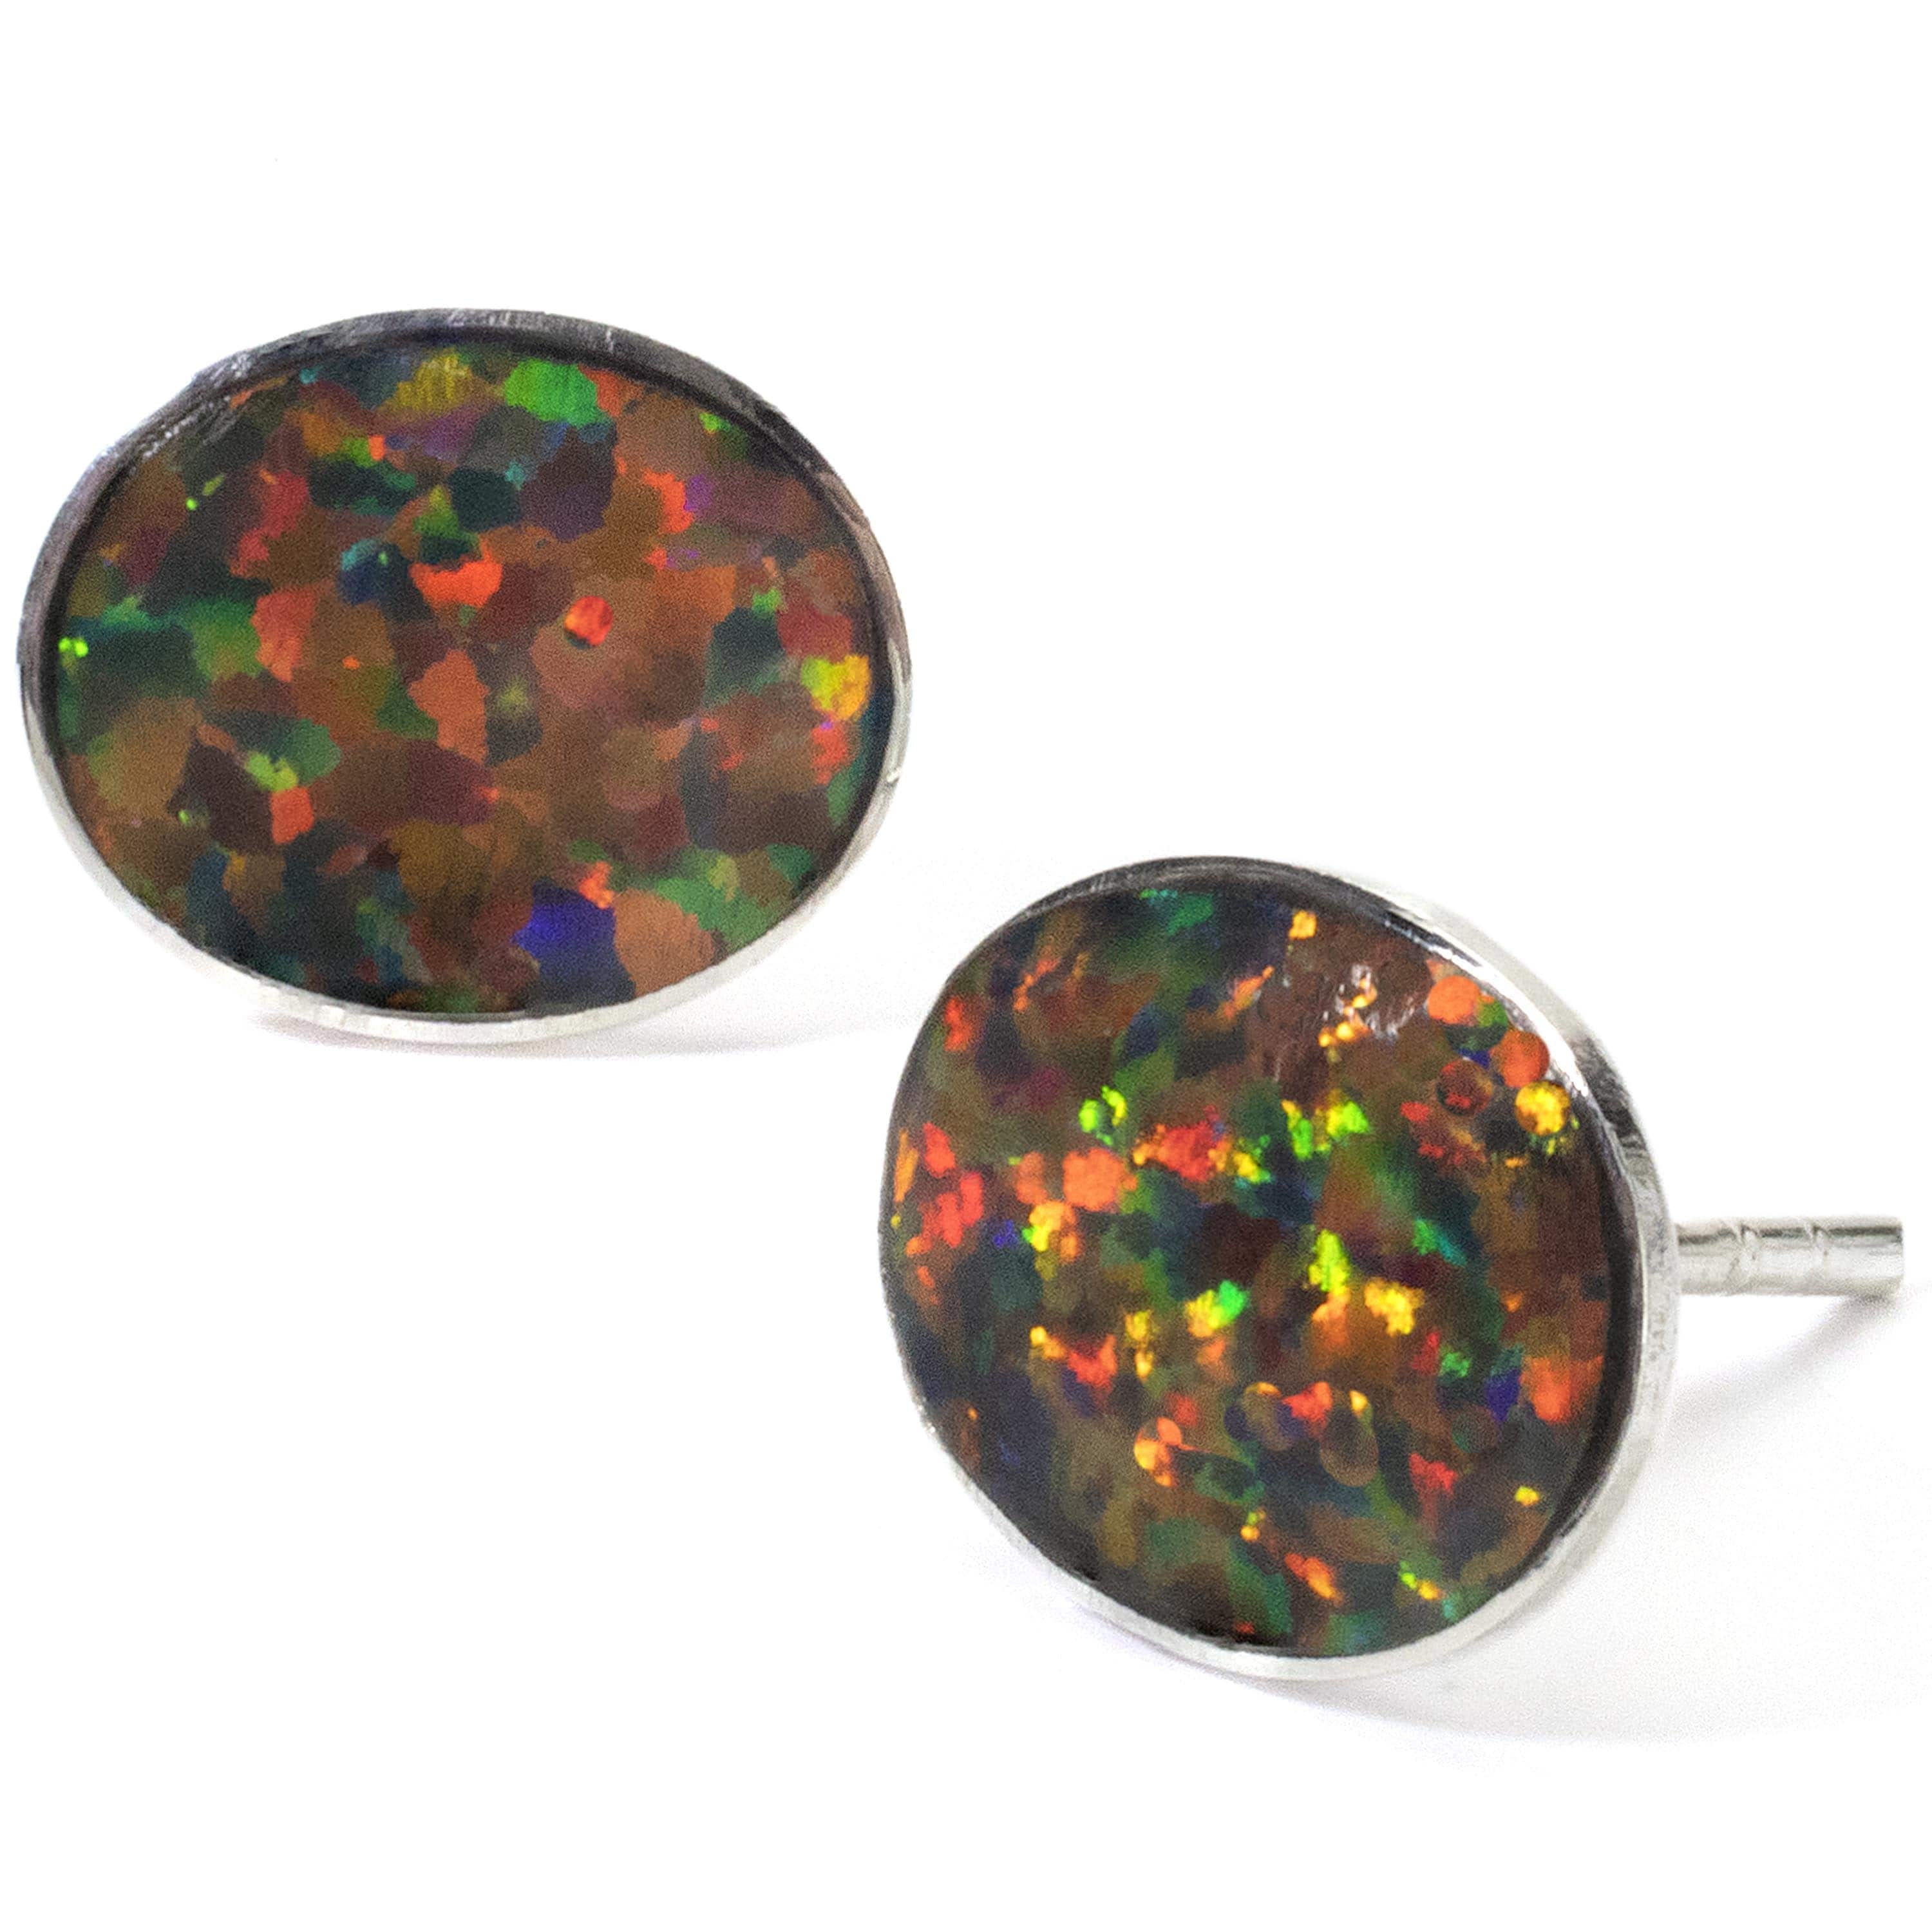 Kalifano Southwest Silver Jewelry Rainbow Opal Oval Earrings Handmade with Sterling Silver NME.0026.RO